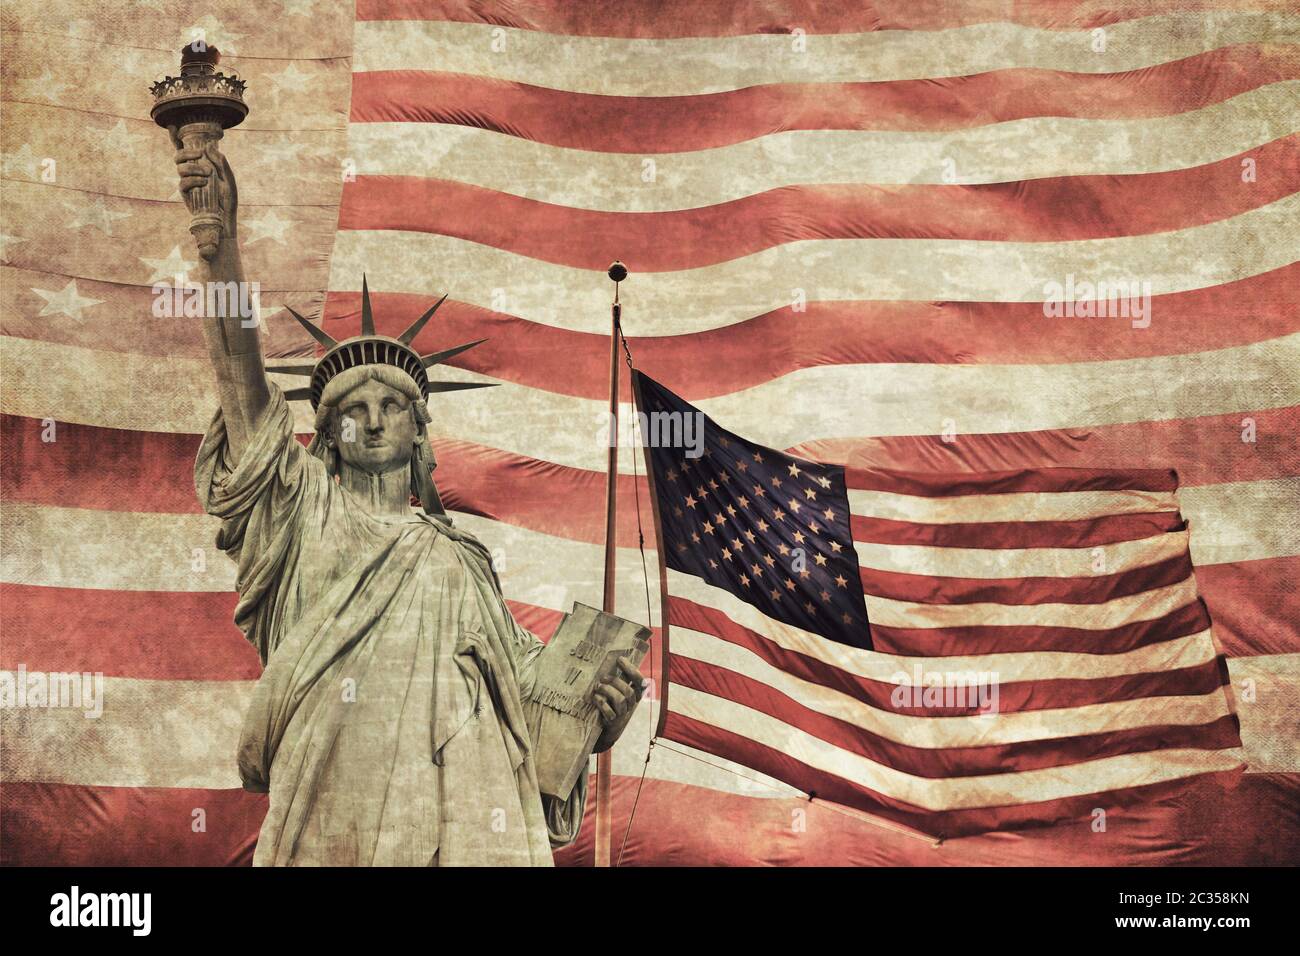 Dirty vintage collage of Lady Liberty and American flag in the  background. Stock Photo